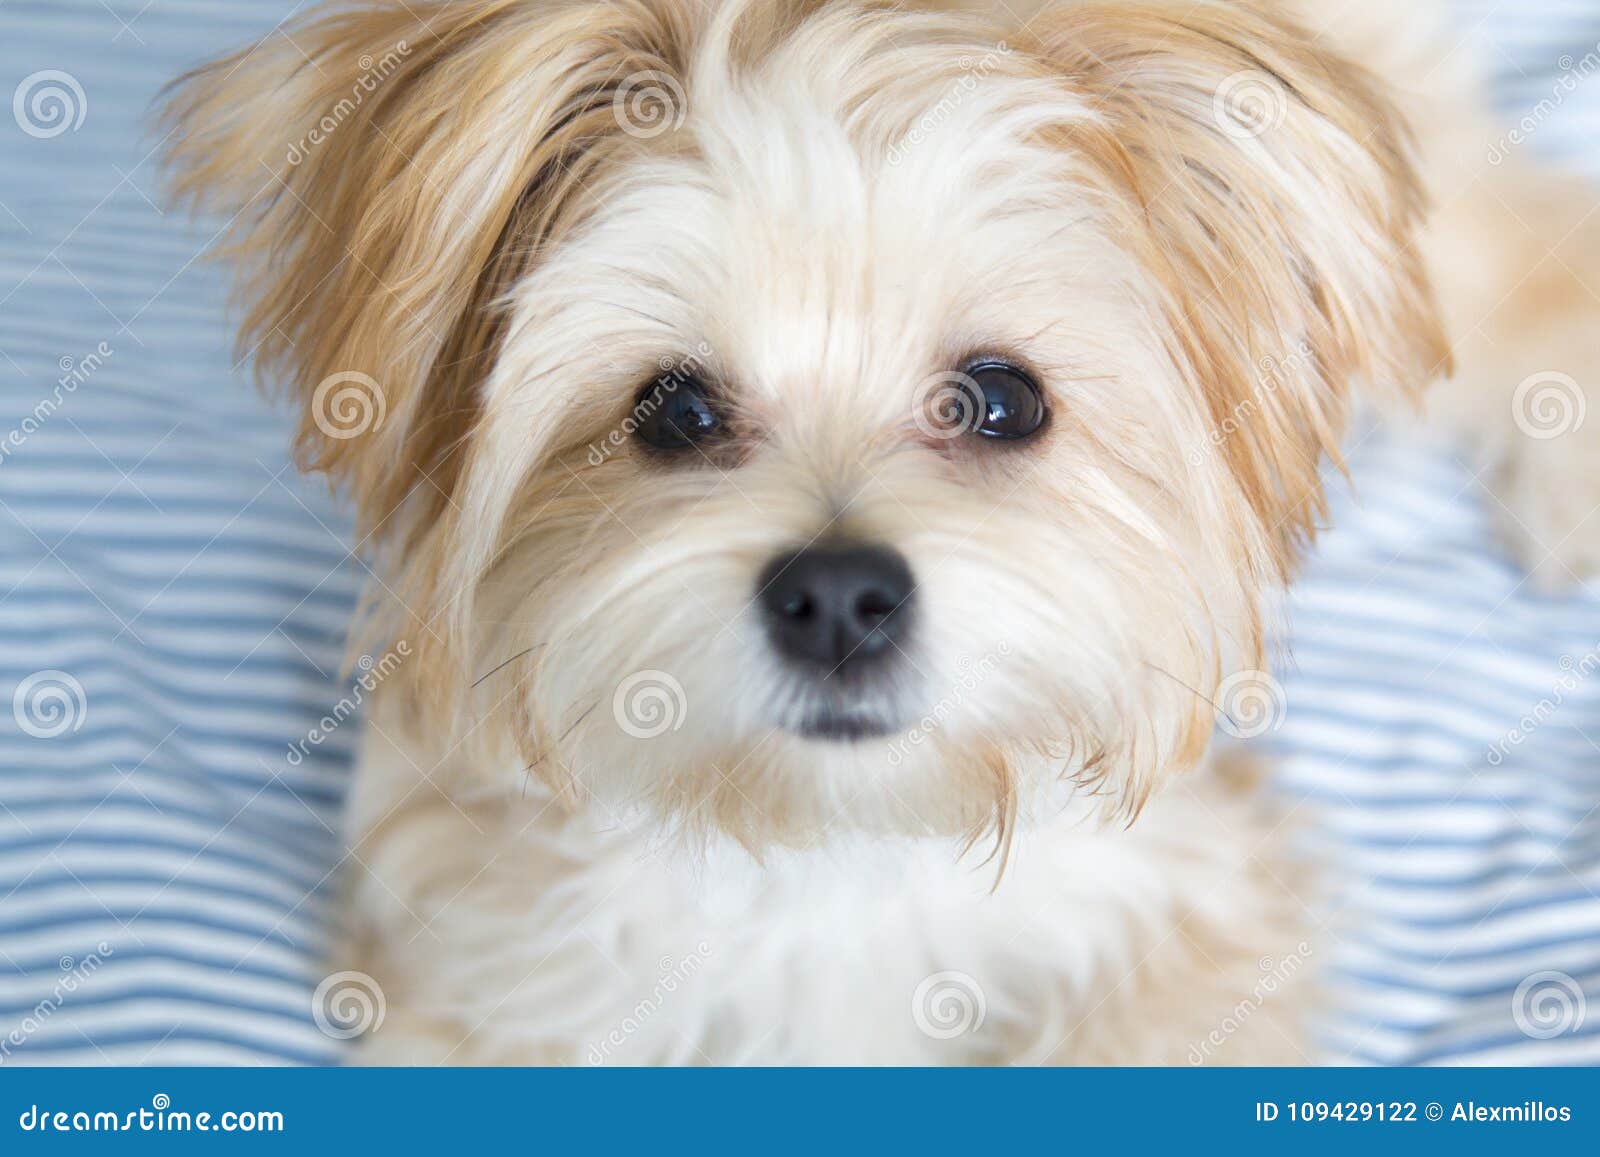 sweet morkie puppy looking directly at the camera.